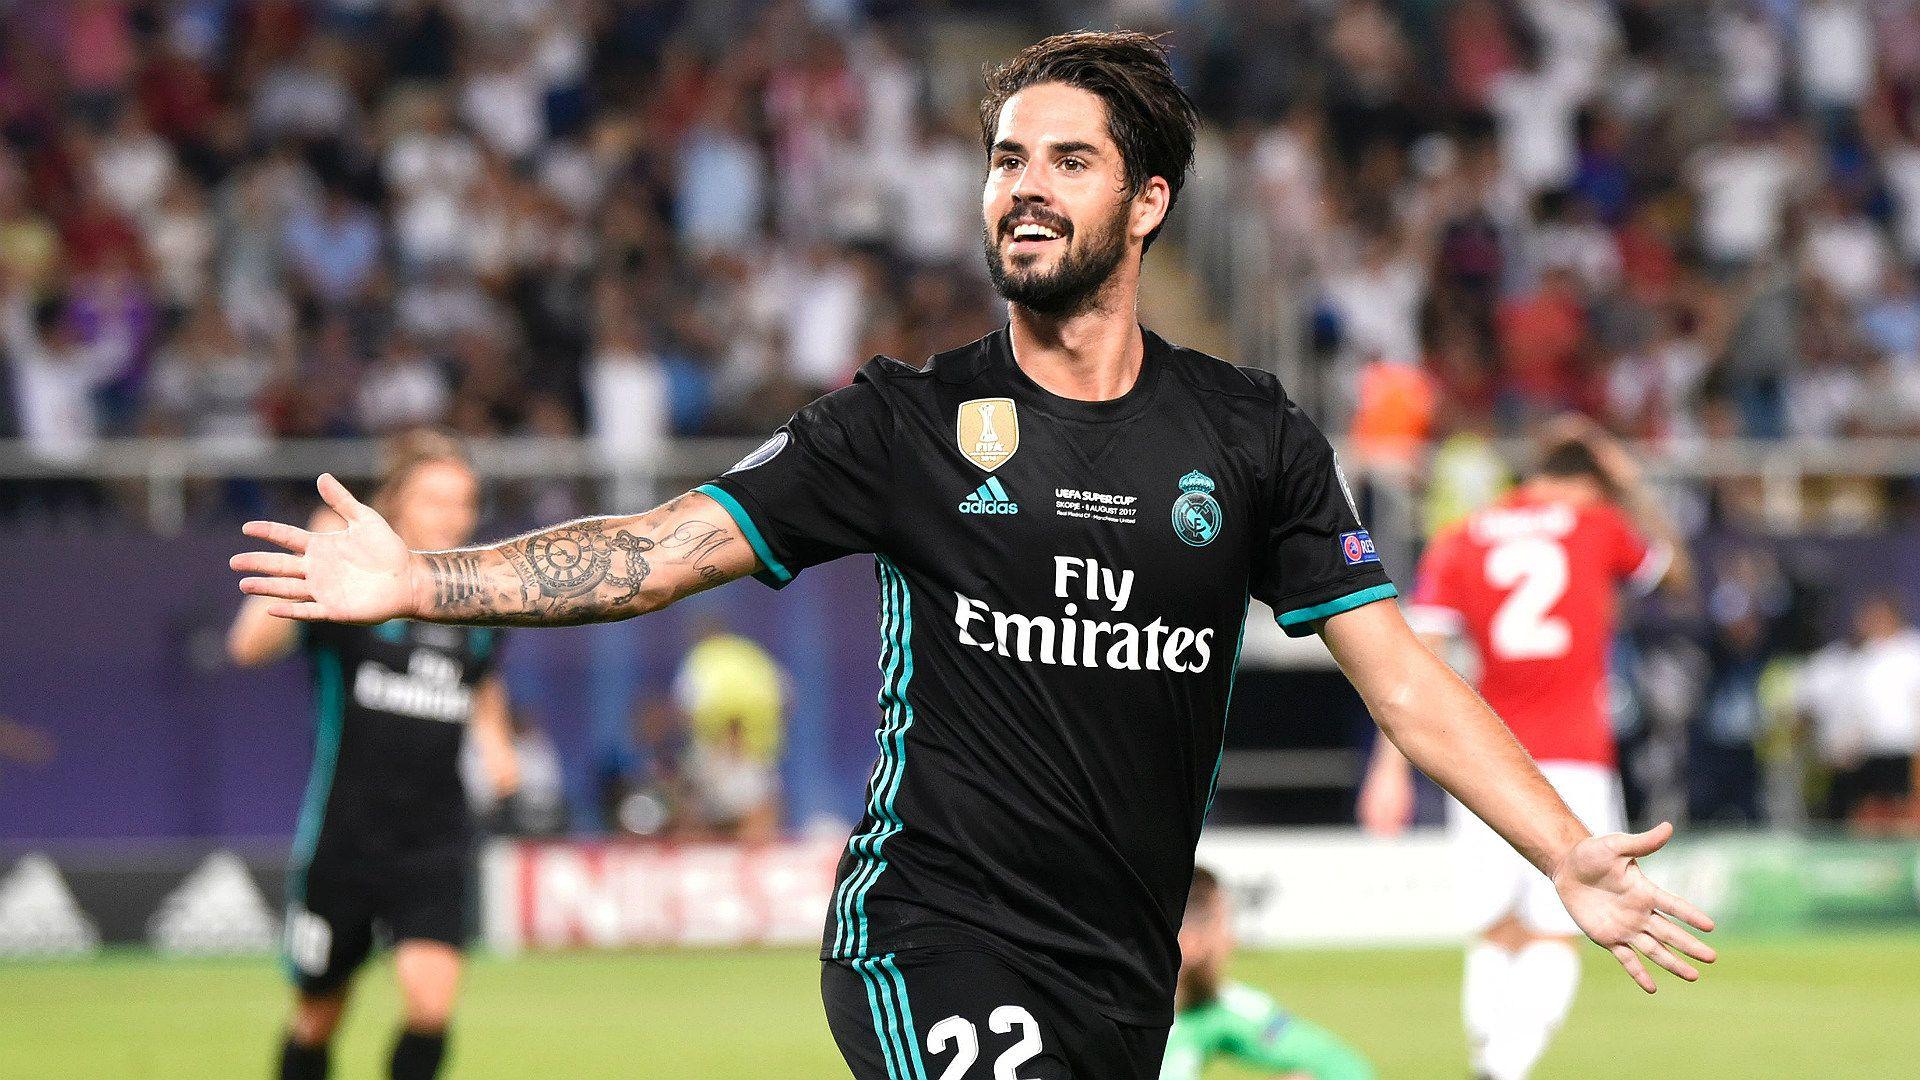 Man City Reportedly Contact Isco About Summer Transfer